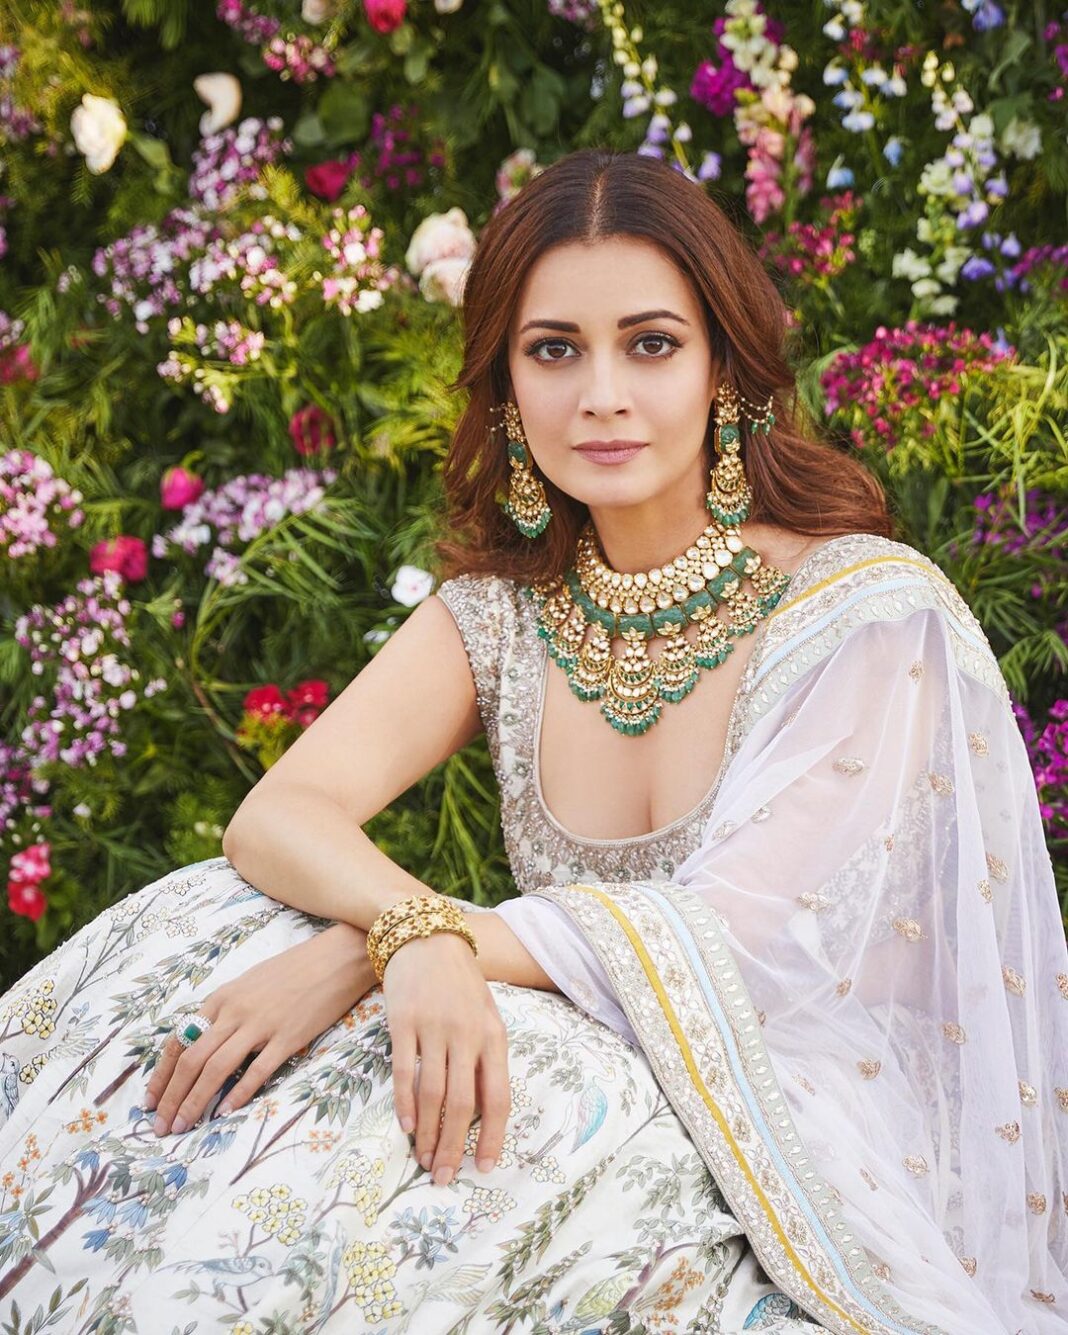 Dia Mirza Instagram - “More people are slowly discovering how their consumption patterns and lifestyles impact the environment. If you look at the traditional forms of Indian weddings across the board, there was never a desire for pomp and show. It was always about beauty, ethnicity, simplicity and grace. The big fat Indian wedding is a product of Bollywood and I reckon now is a great time for filmmakers to change the way they represent these festivities on the silver screen. As long as the shift happens within us, we can find ways to bring that change into everything else we do.” #SustainableCelebrations #MakeItGreen @feminaweddingtimes Photographer: @rohanshrestha Hair and make-up: @harryrajput64 Outfits and styling: @anitadongre Earrings, Necklace and Bangles : @anitadongrepinkcity Ring : @jet_gems Location: @jadegardenbanquets Floral backdrop: @champsfleur